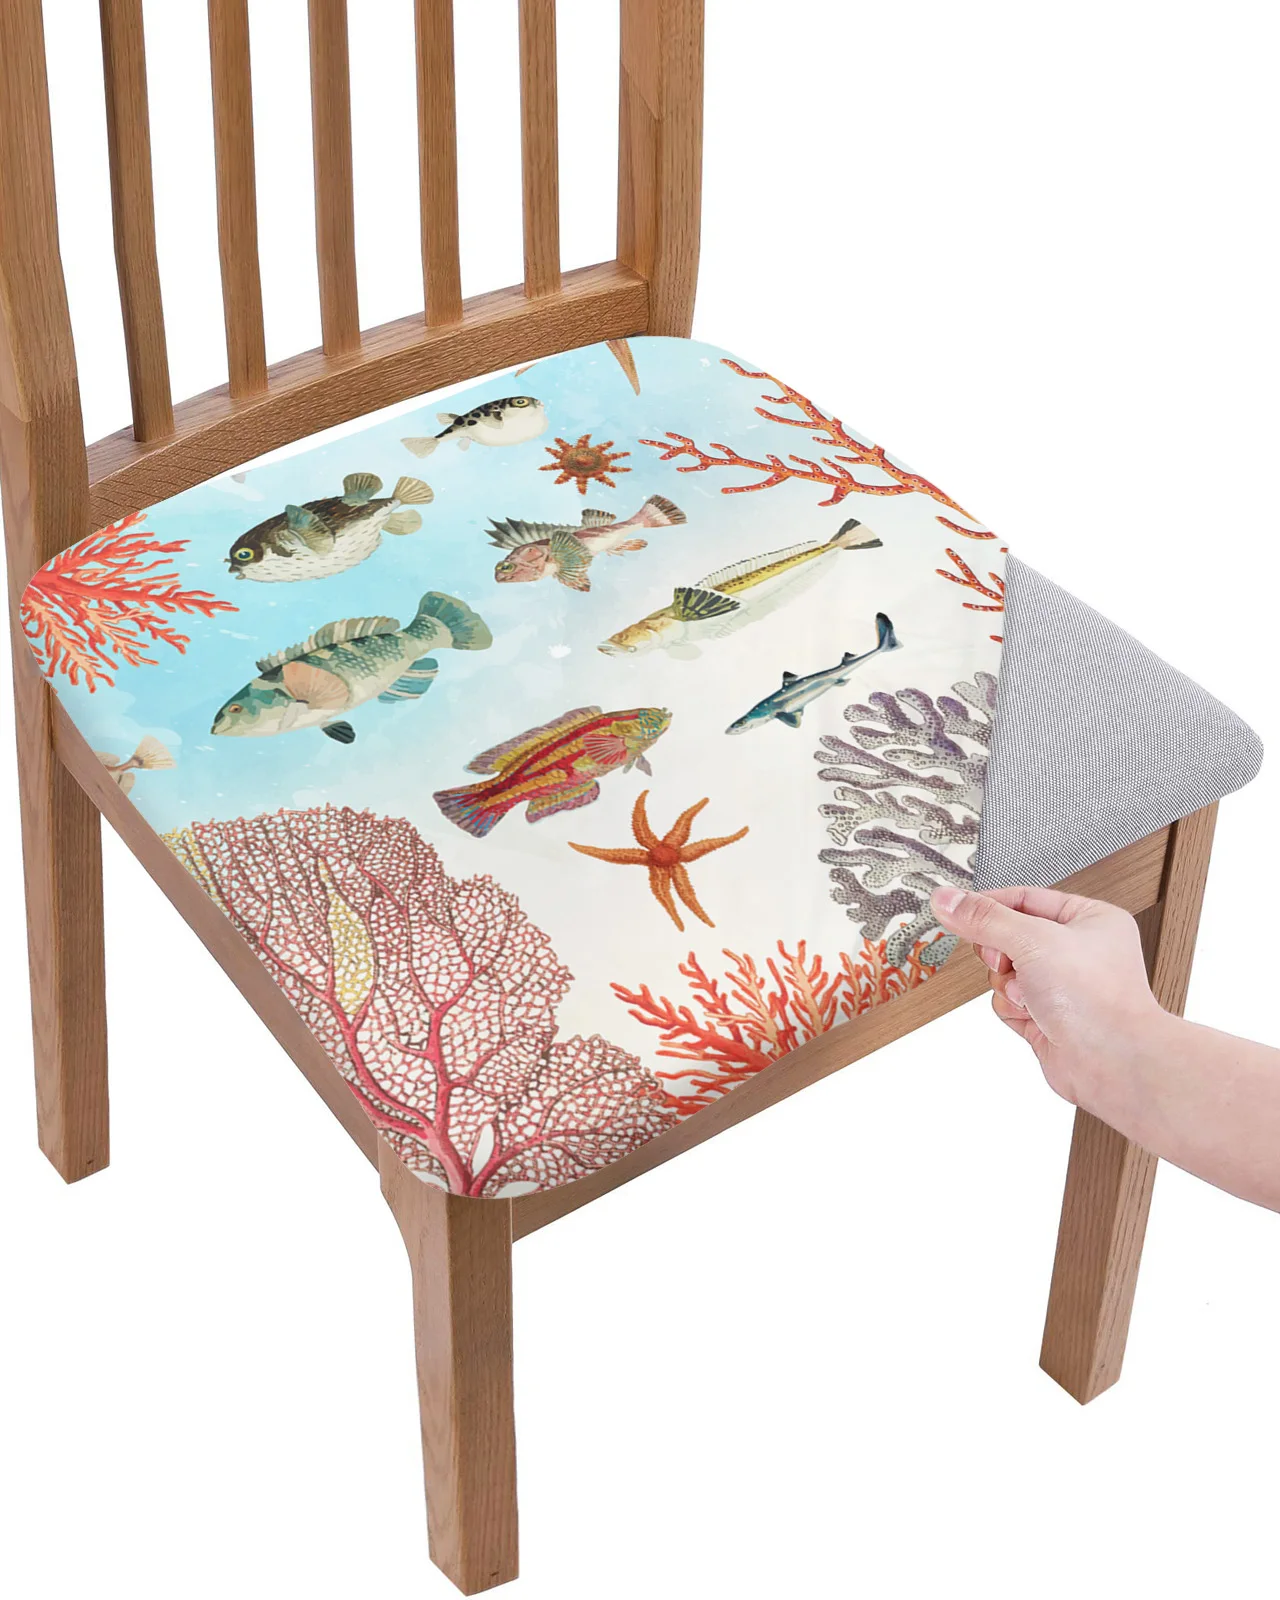 Underwater World Fish Coral Starfish Marine Life Ocean Elastic Seat Cover For Chair Slipcovers Home Chair Protector Chair Cover